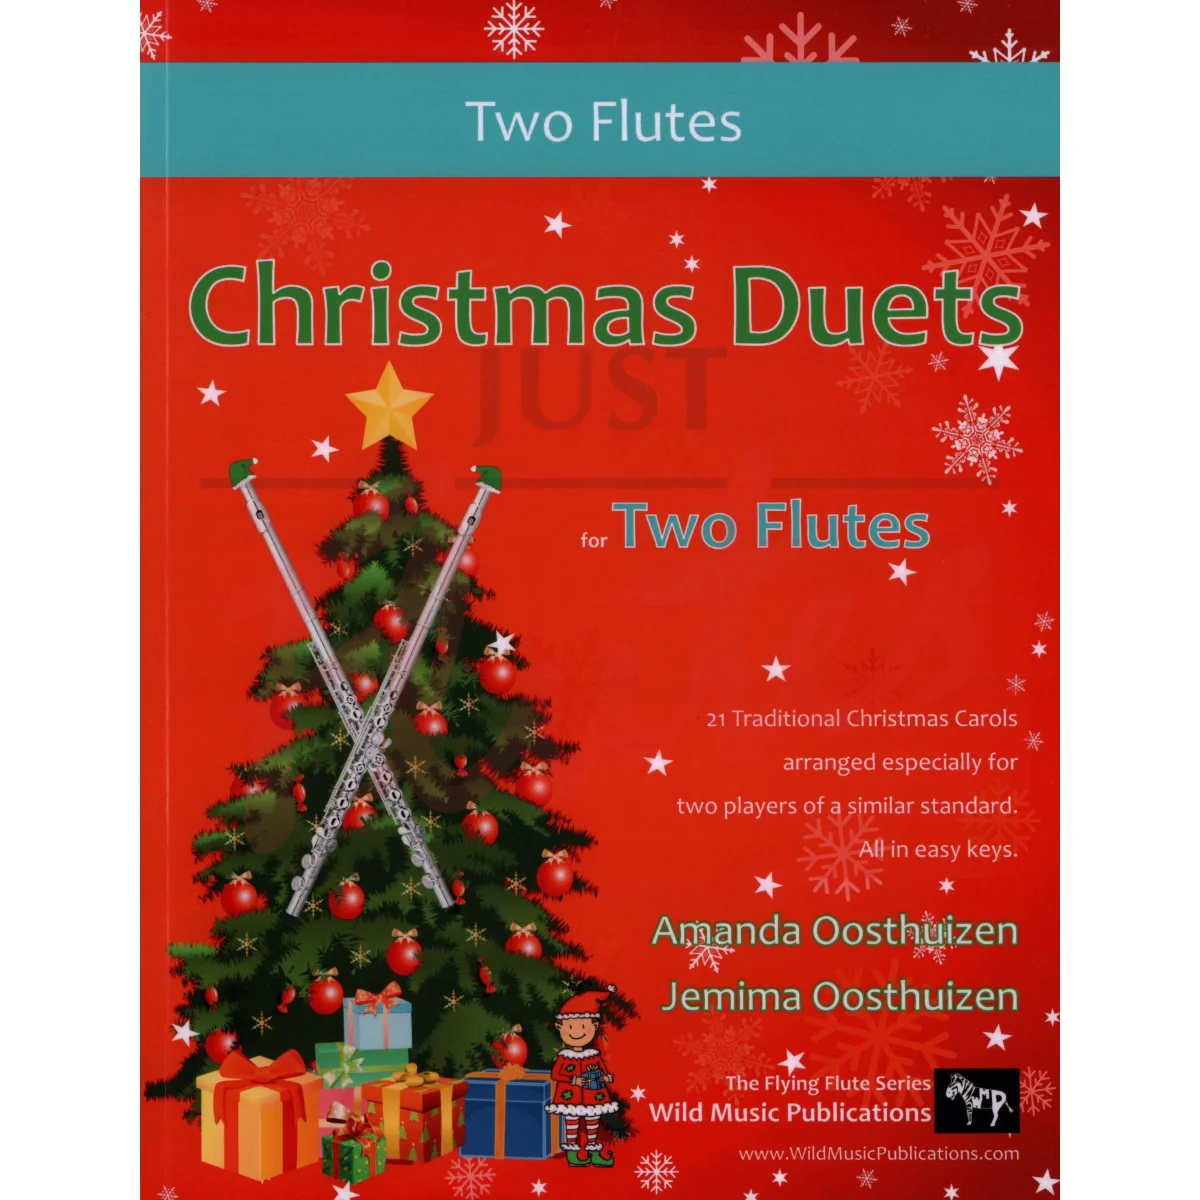 Christmas Duets for Two Flutes